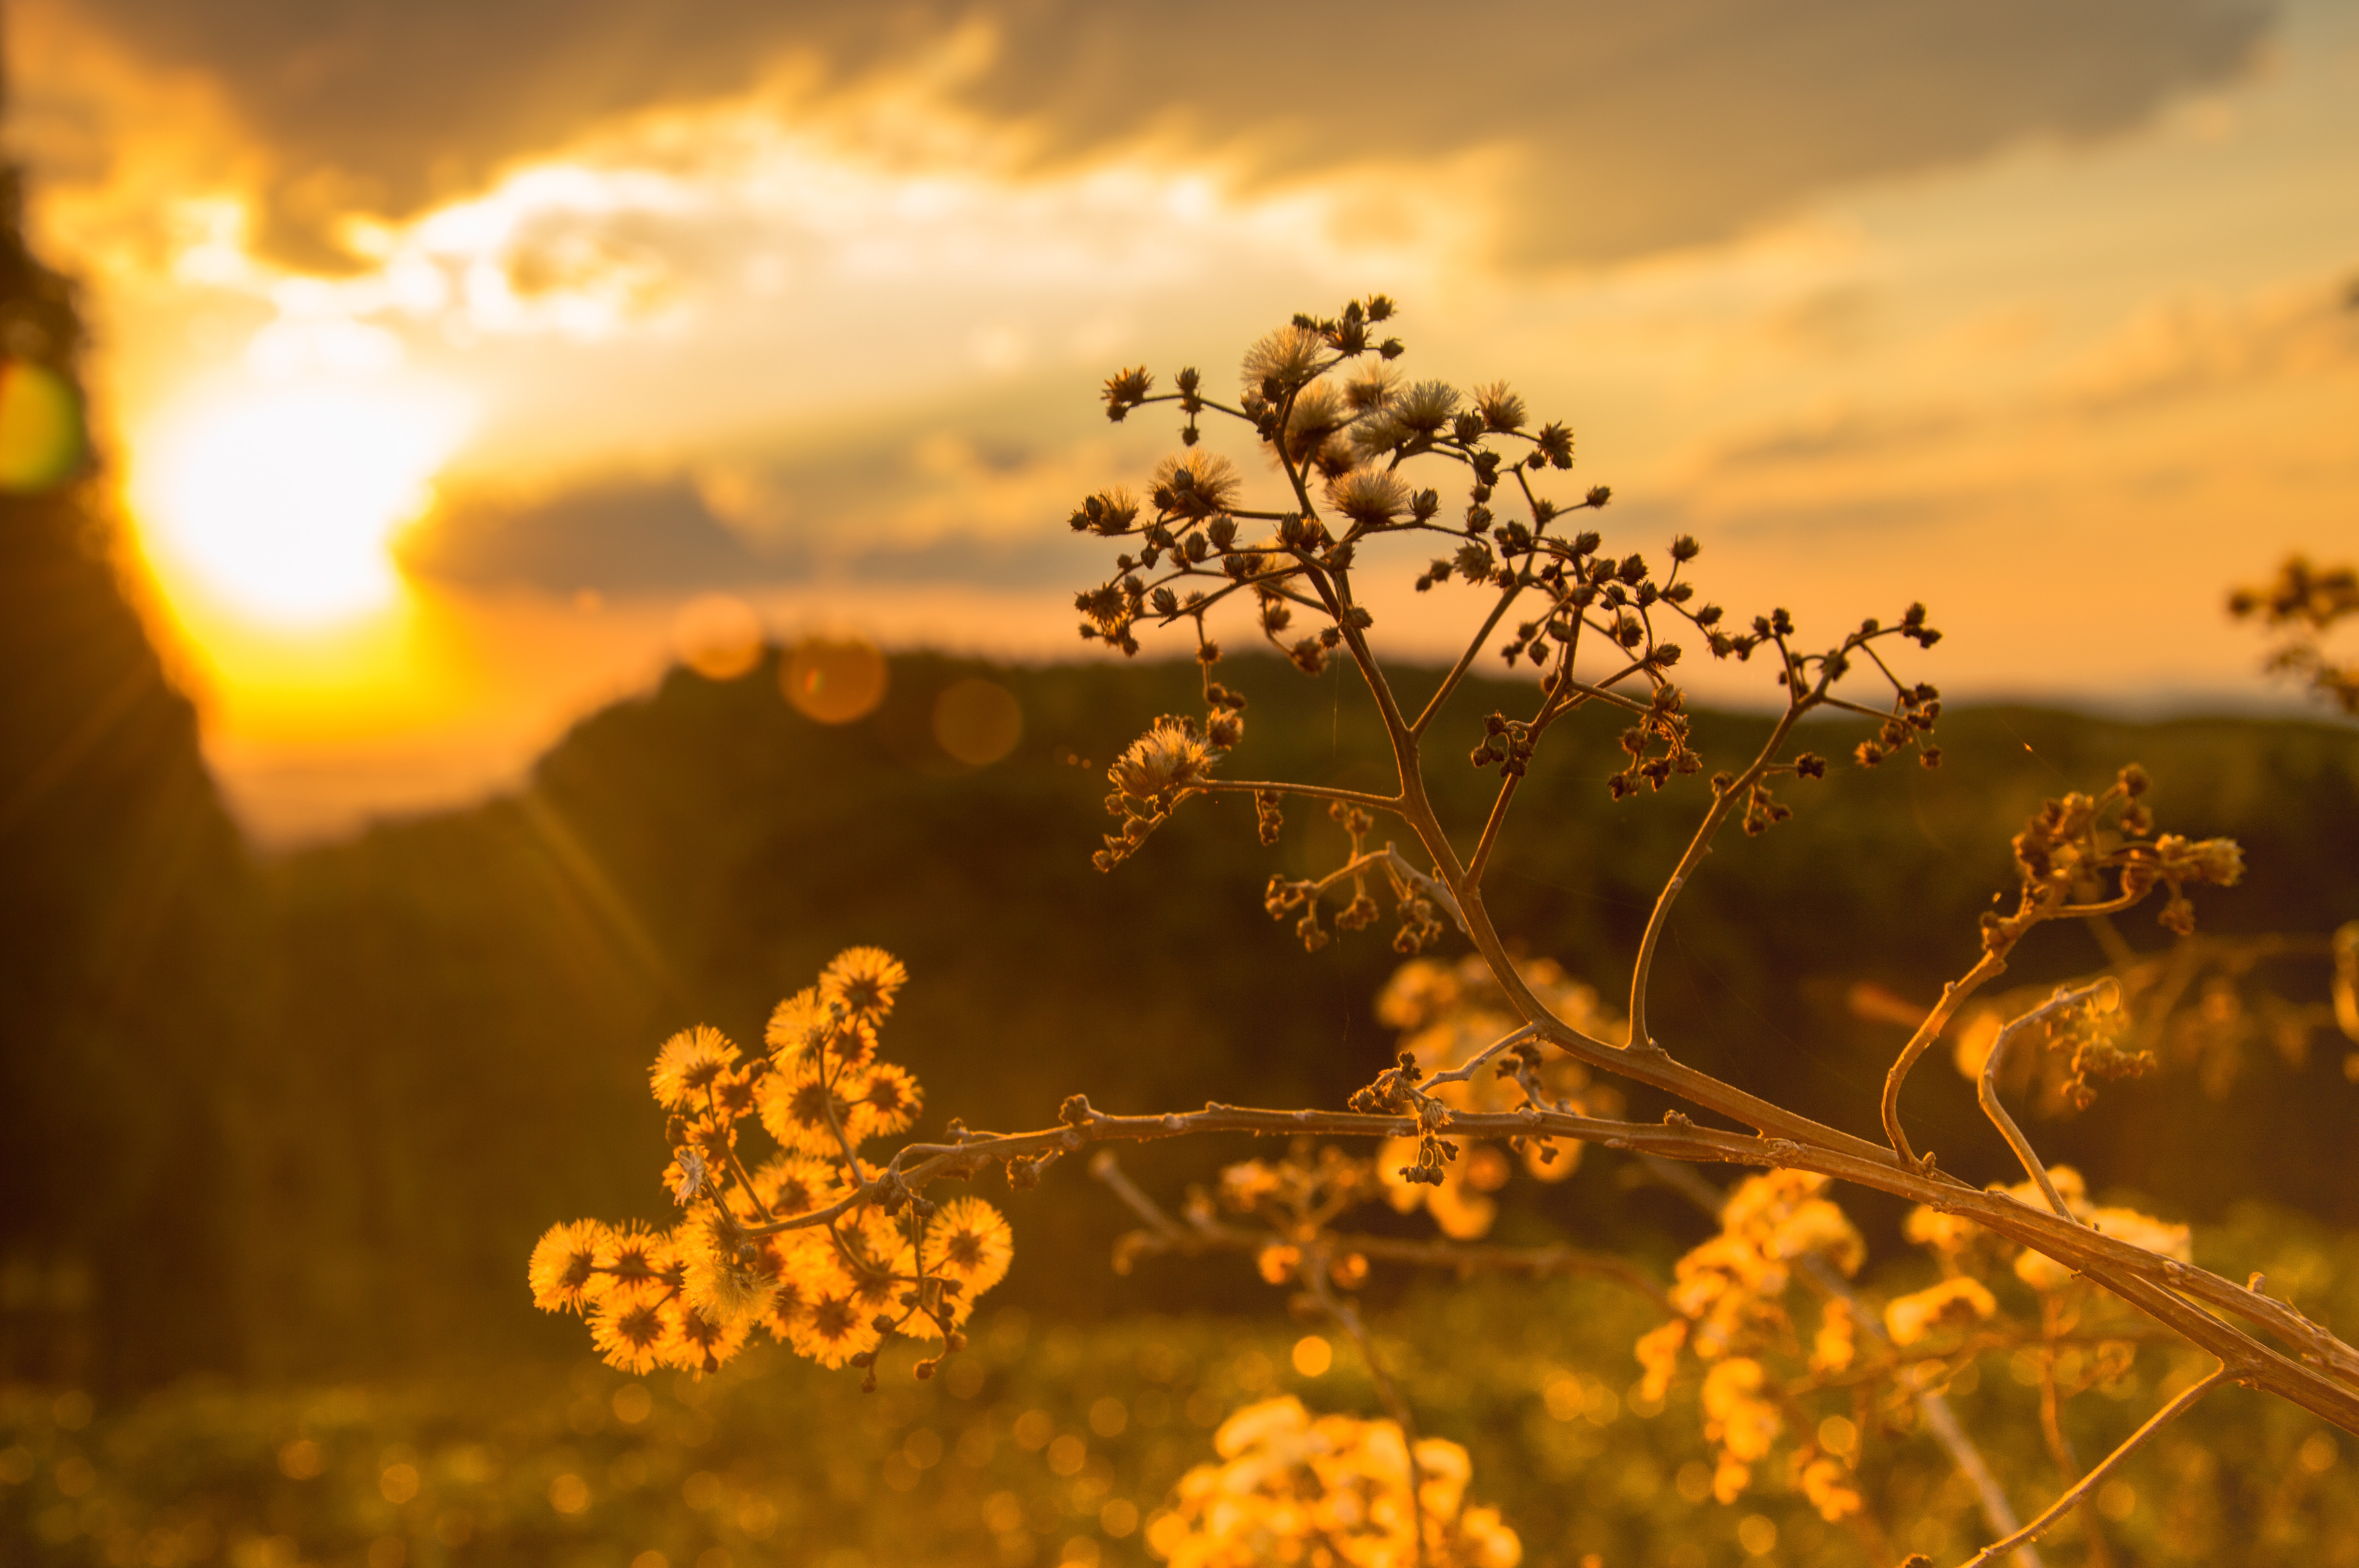 White petaled flowers at golden hour photo